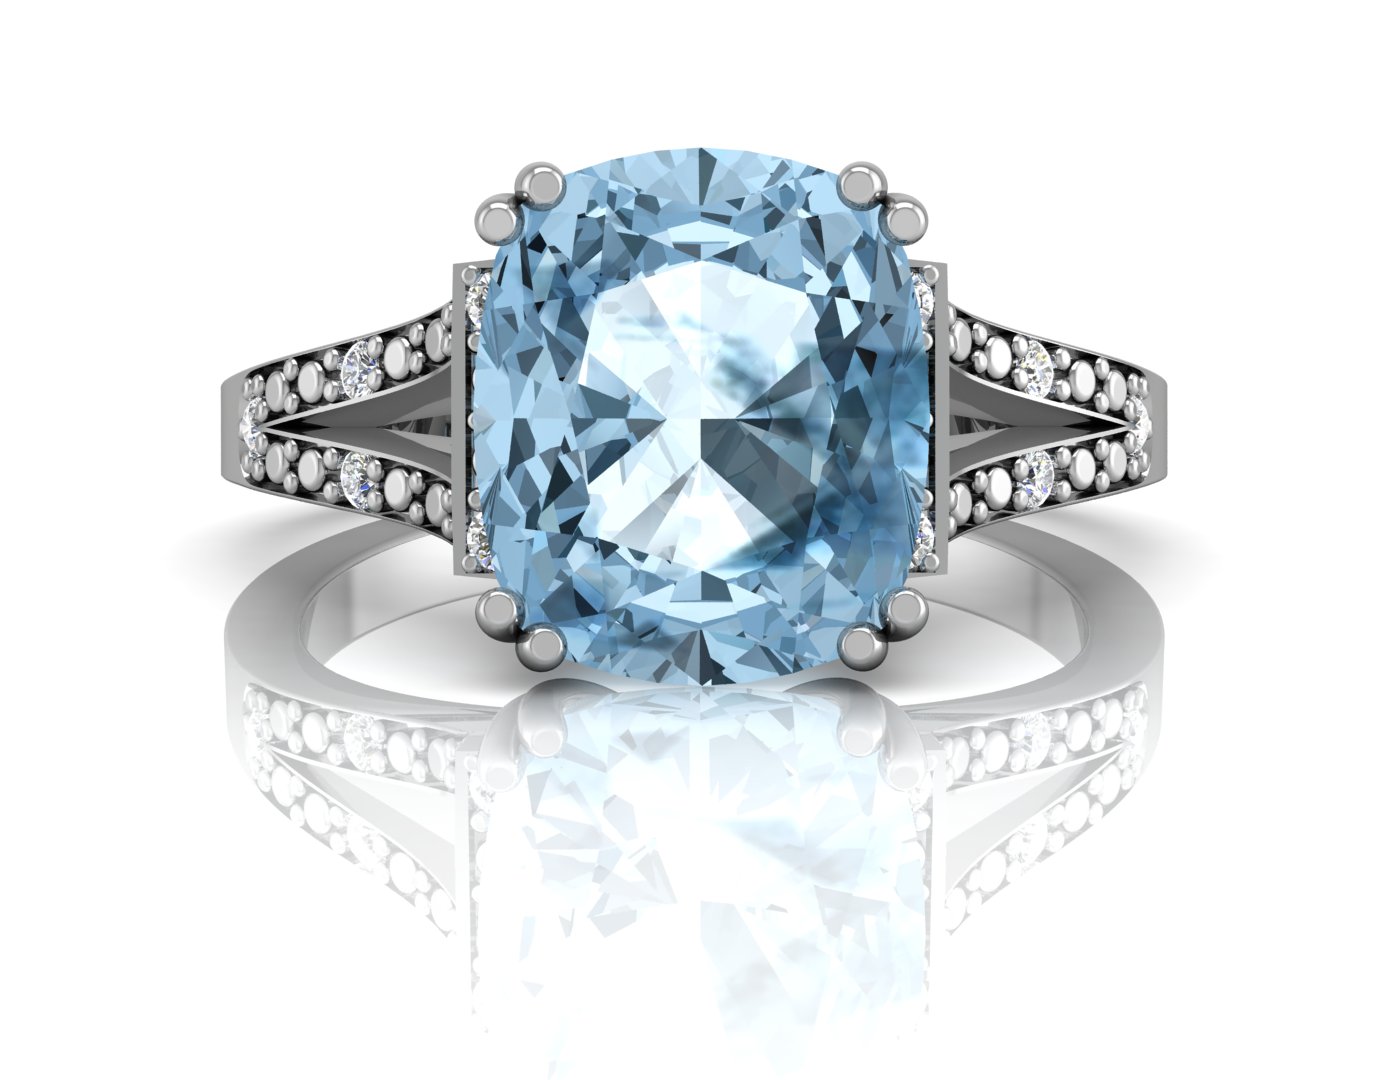 9ct White Gold Diamond And Blue Topaz Ring 0.07 Carats - Image 4 of 5